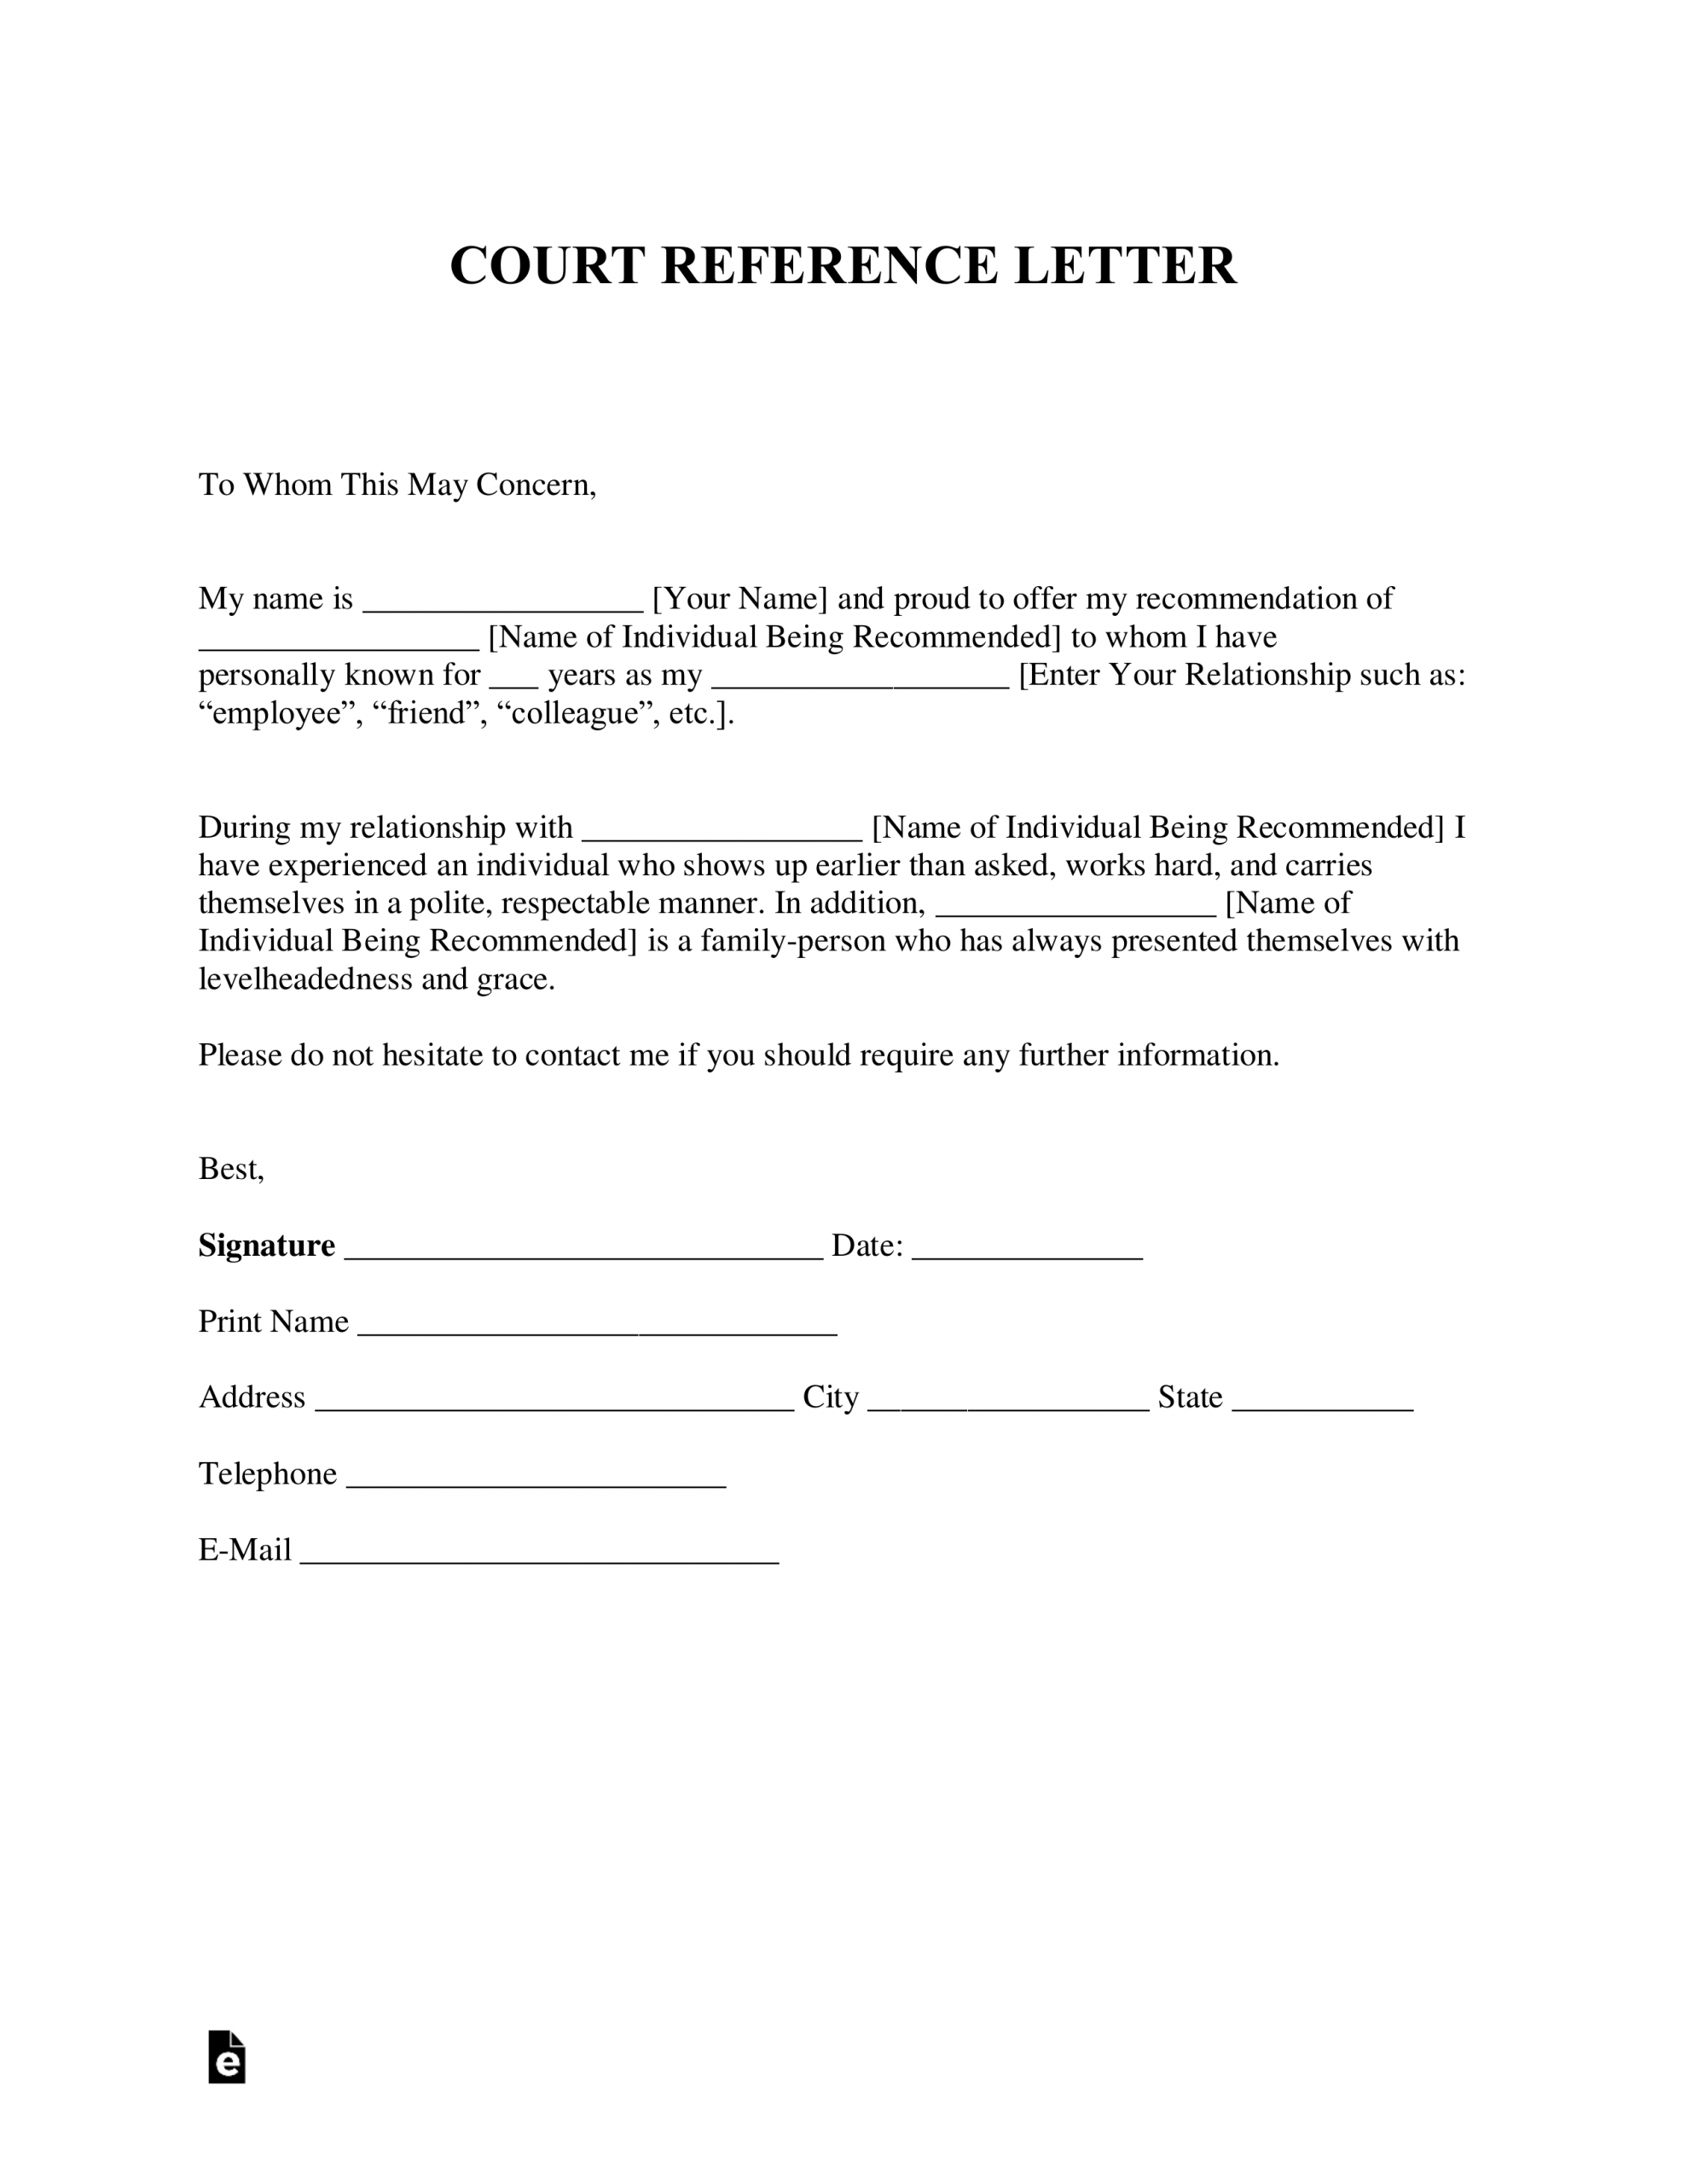 Free Character Reference Letter For Court Template inside size 2550 X 3301